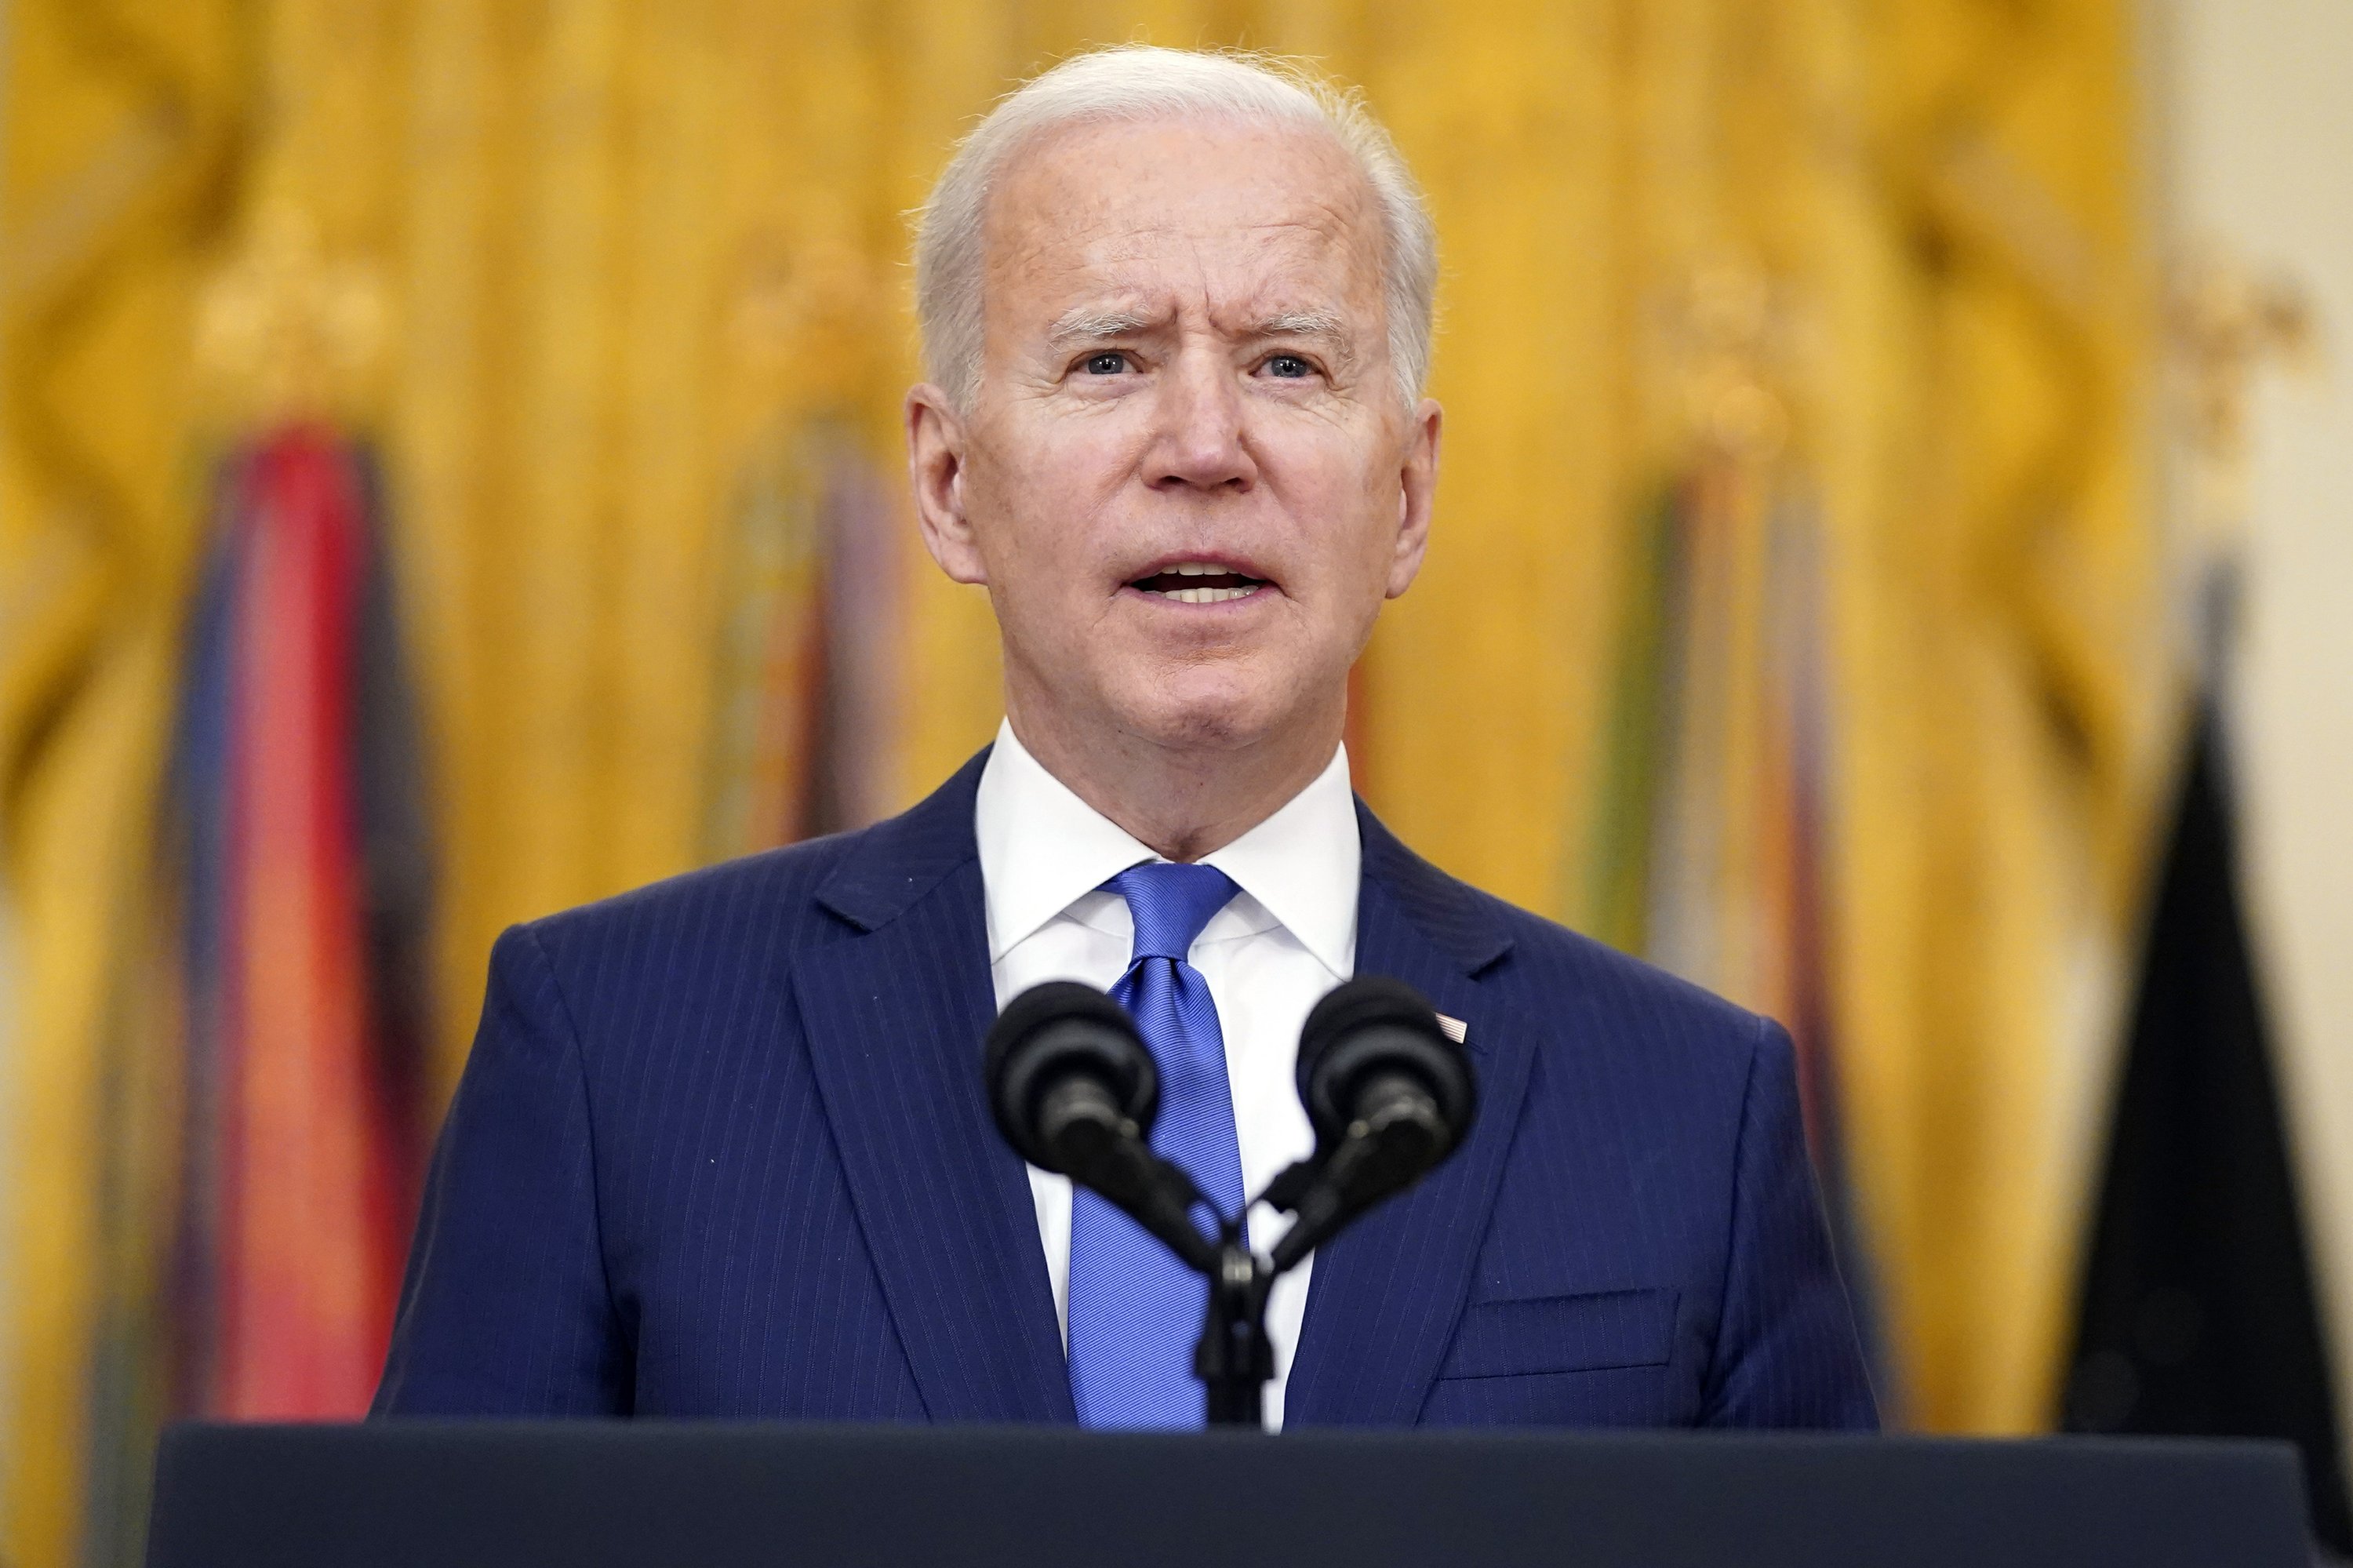 $ 1.9T Biden Aid Package, a bet that the government can help us heal